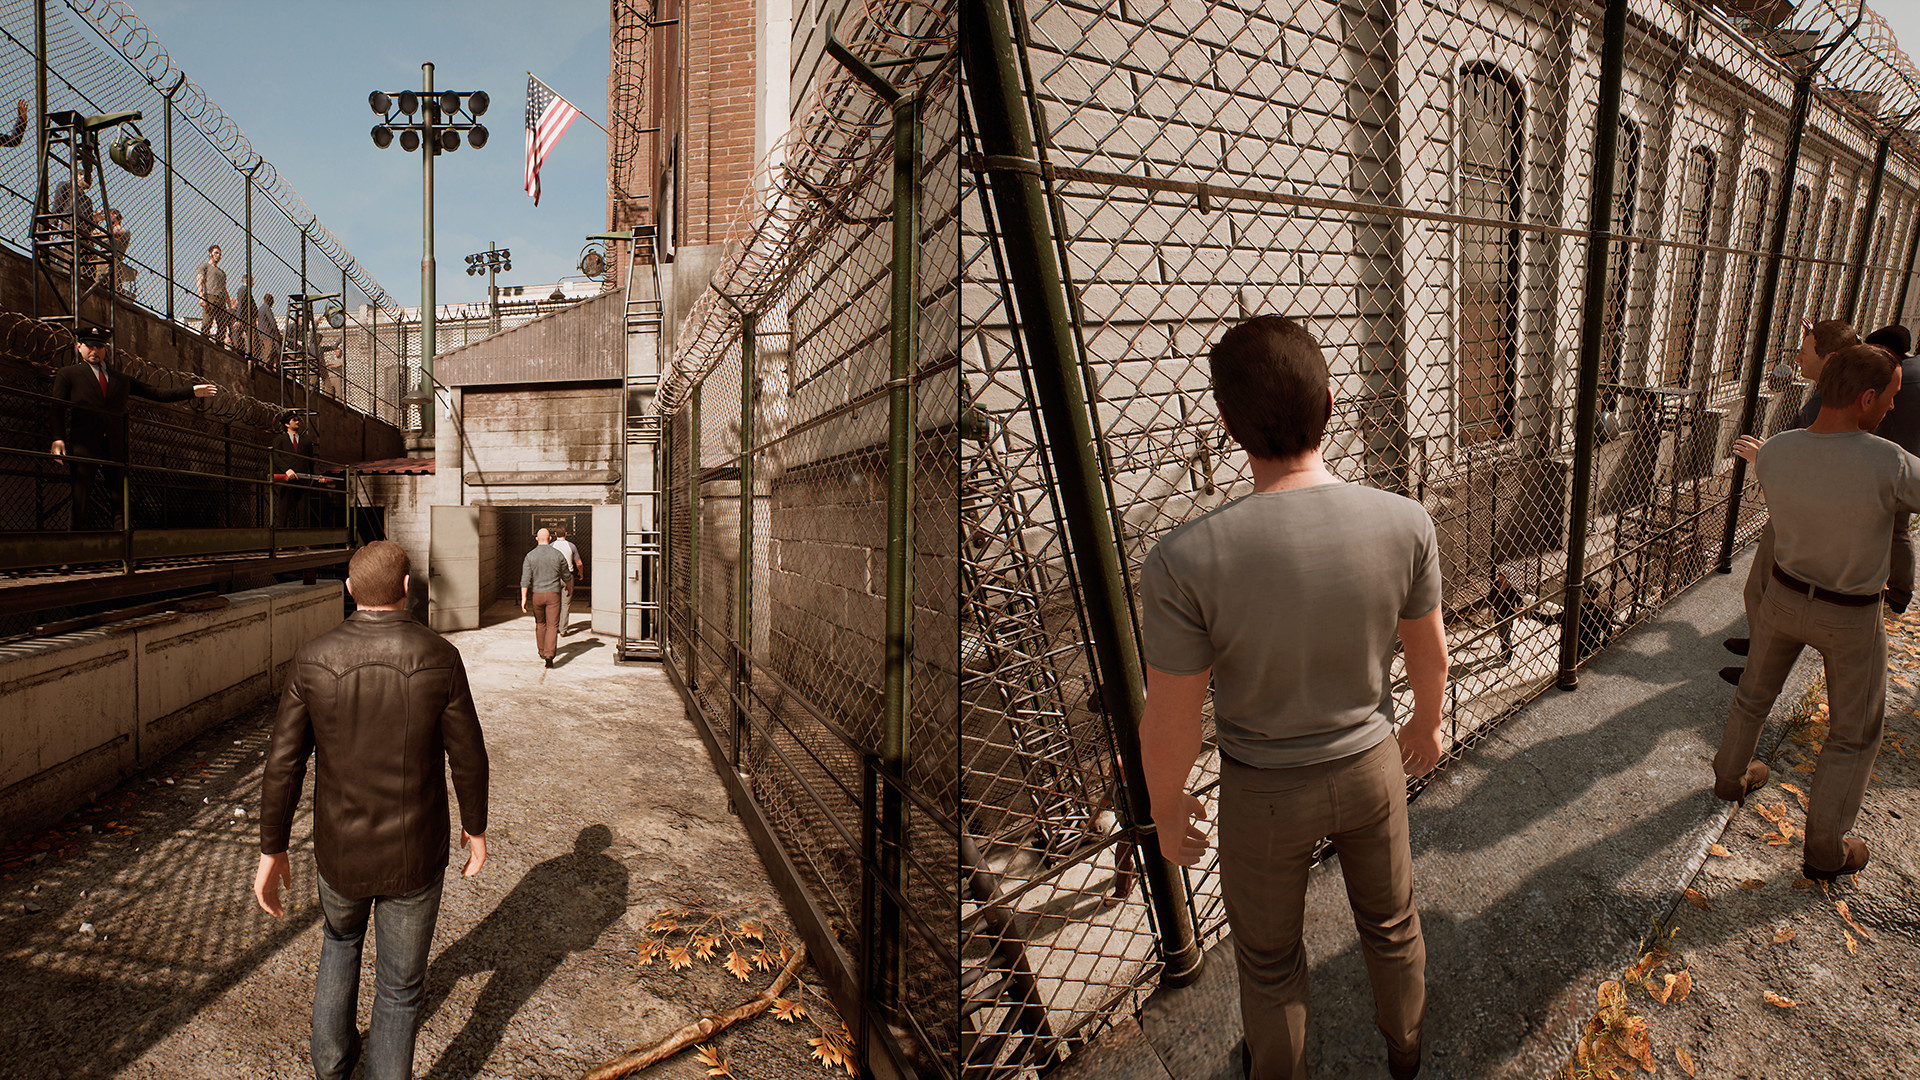 A Way Out Free Download